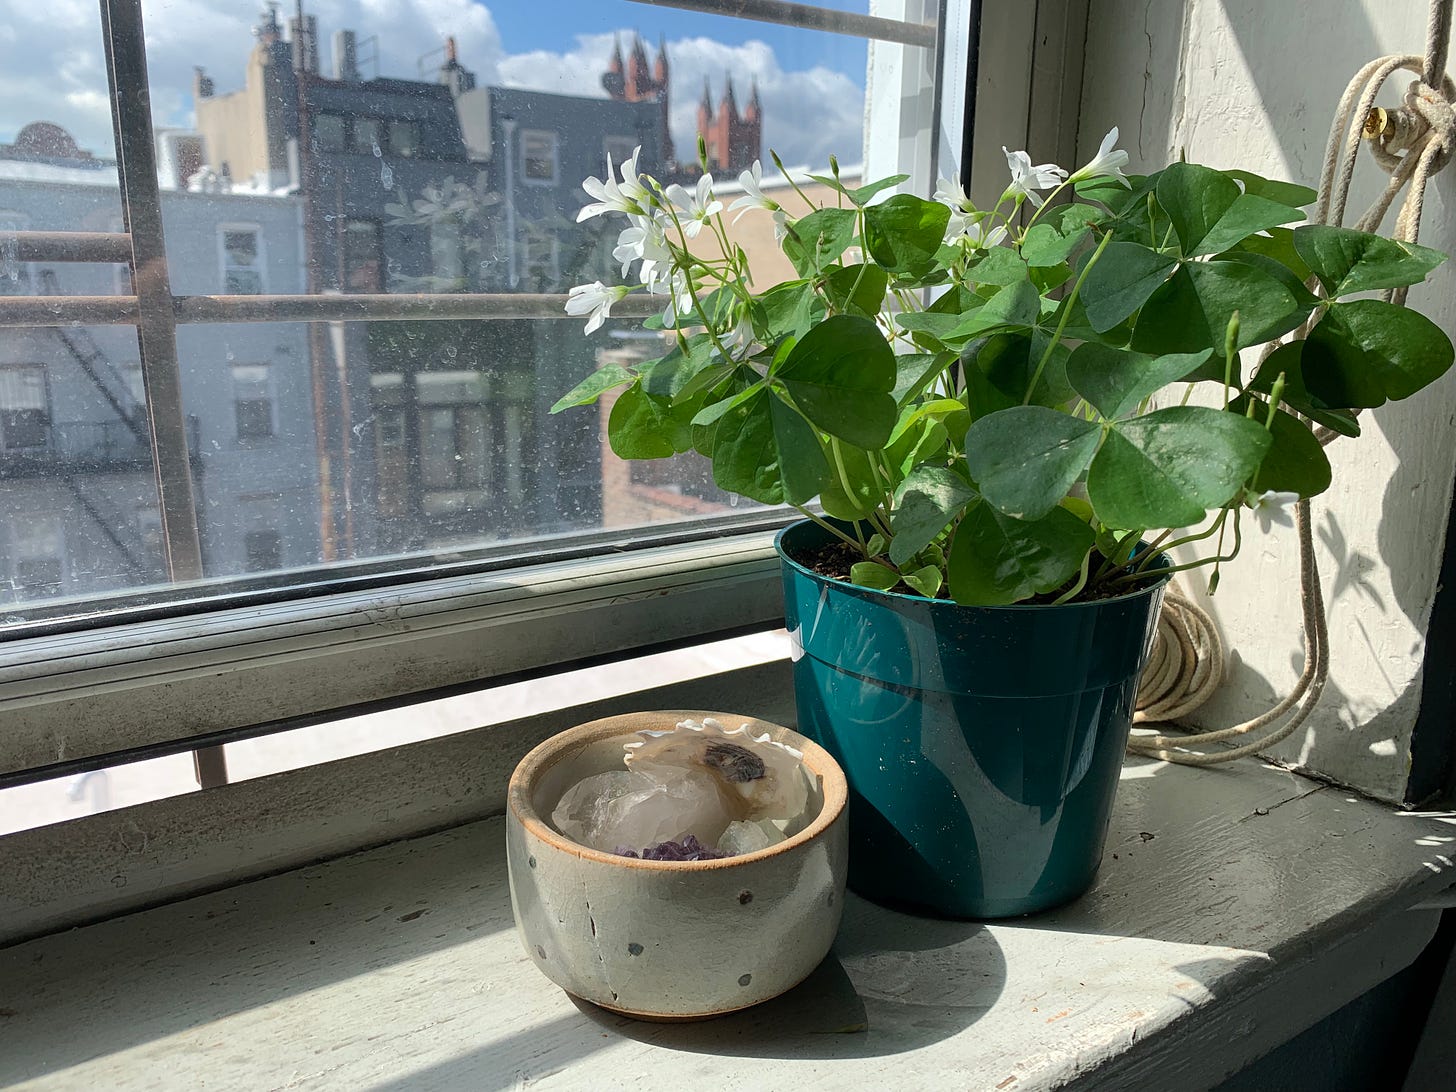 an image of a windowsill, an oxalis plant in a plastic pot, small white flowers and green leaves bend towards the sun. a small bowl holds an oyster shell, a quartz crystal.